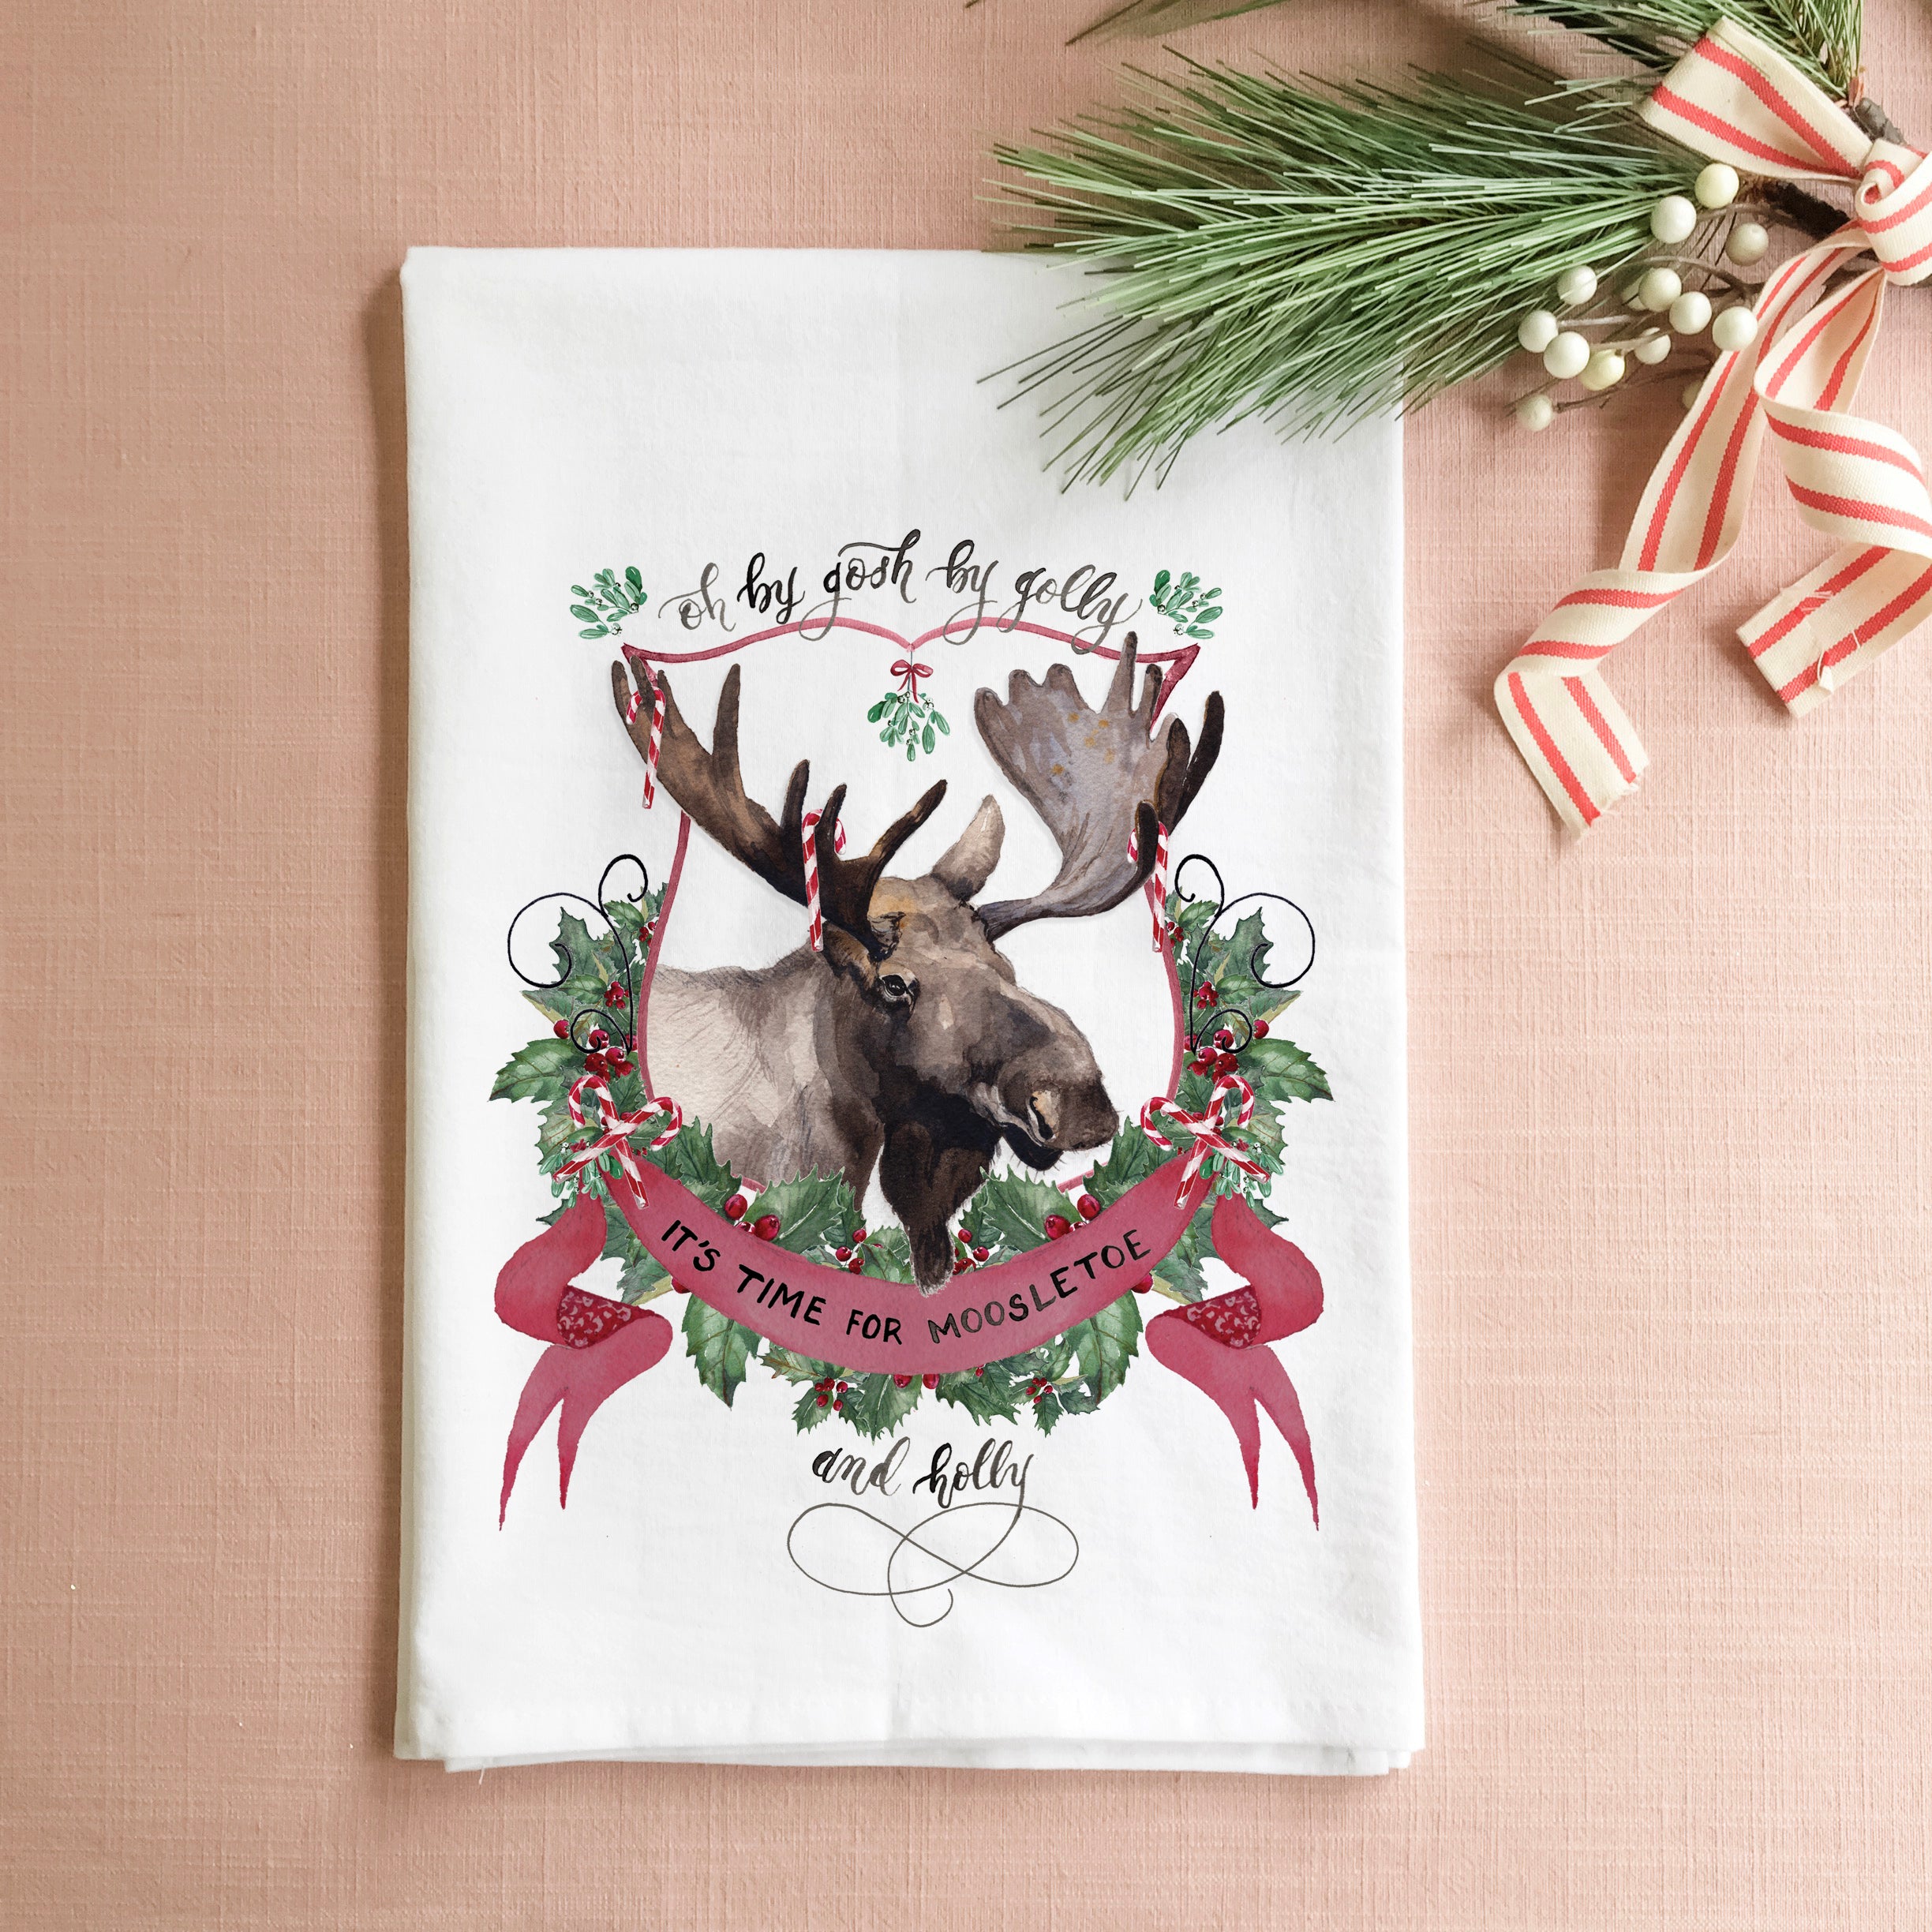 Making A Moose In The Kitchen Tea Towel — Polar Bear Gifts